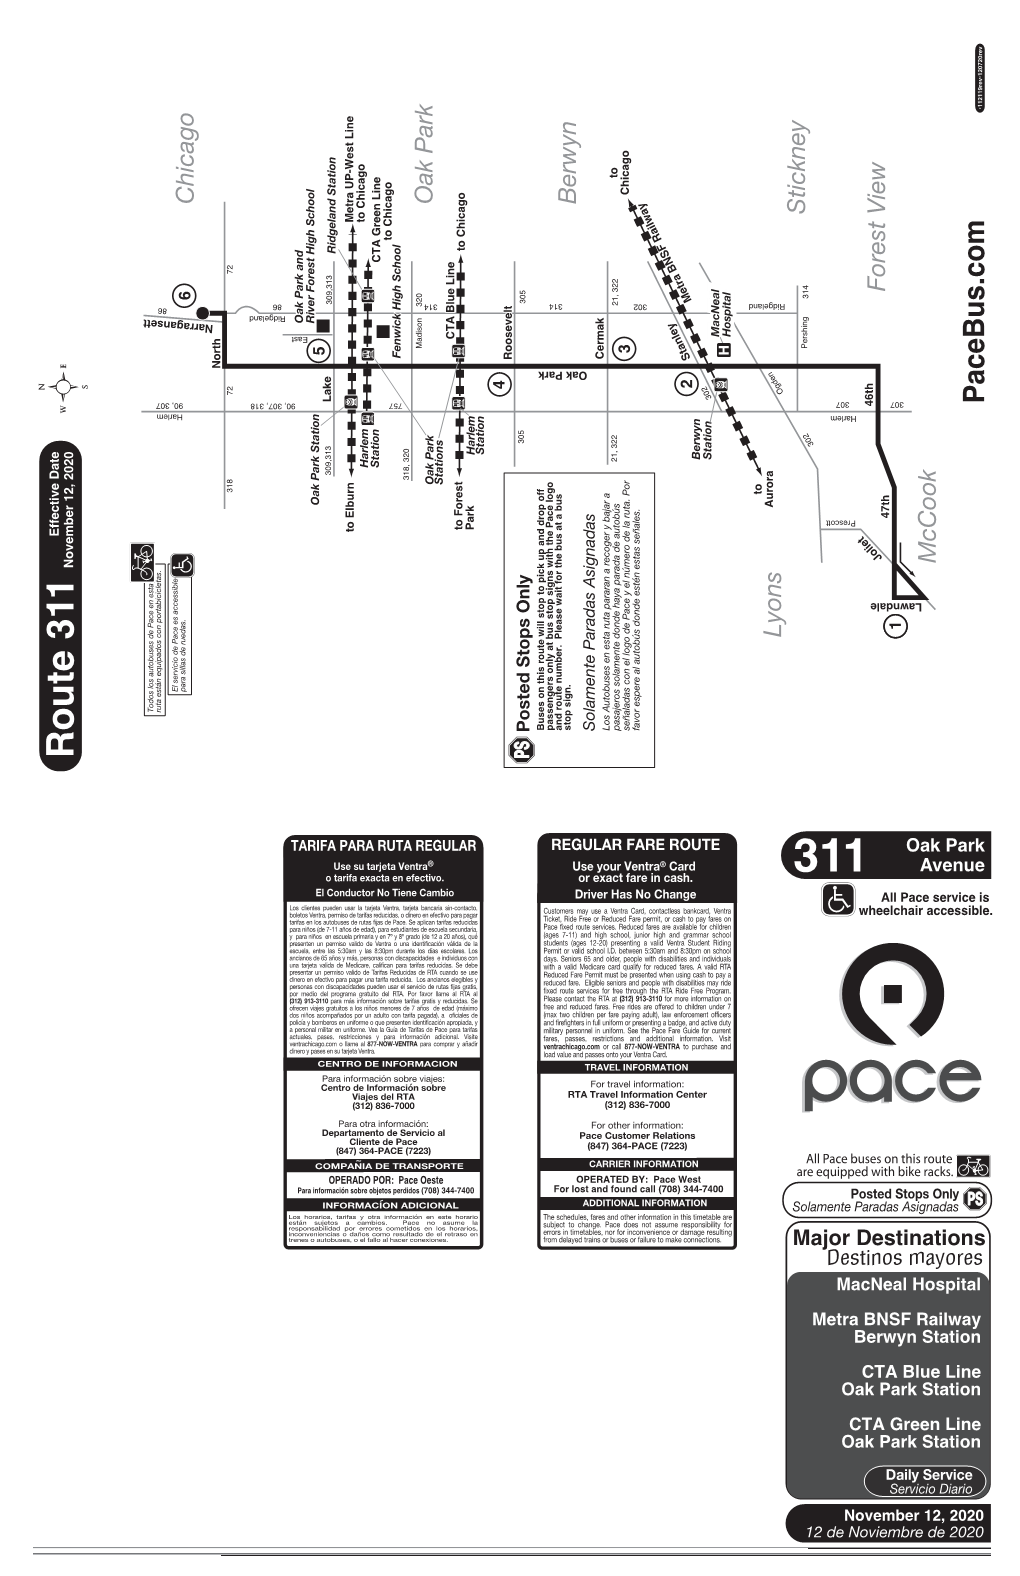 Route Will Stop to Pick up and Drop Off Passengers Only at Bus Stop Signs with the Pace Logo and Route Number